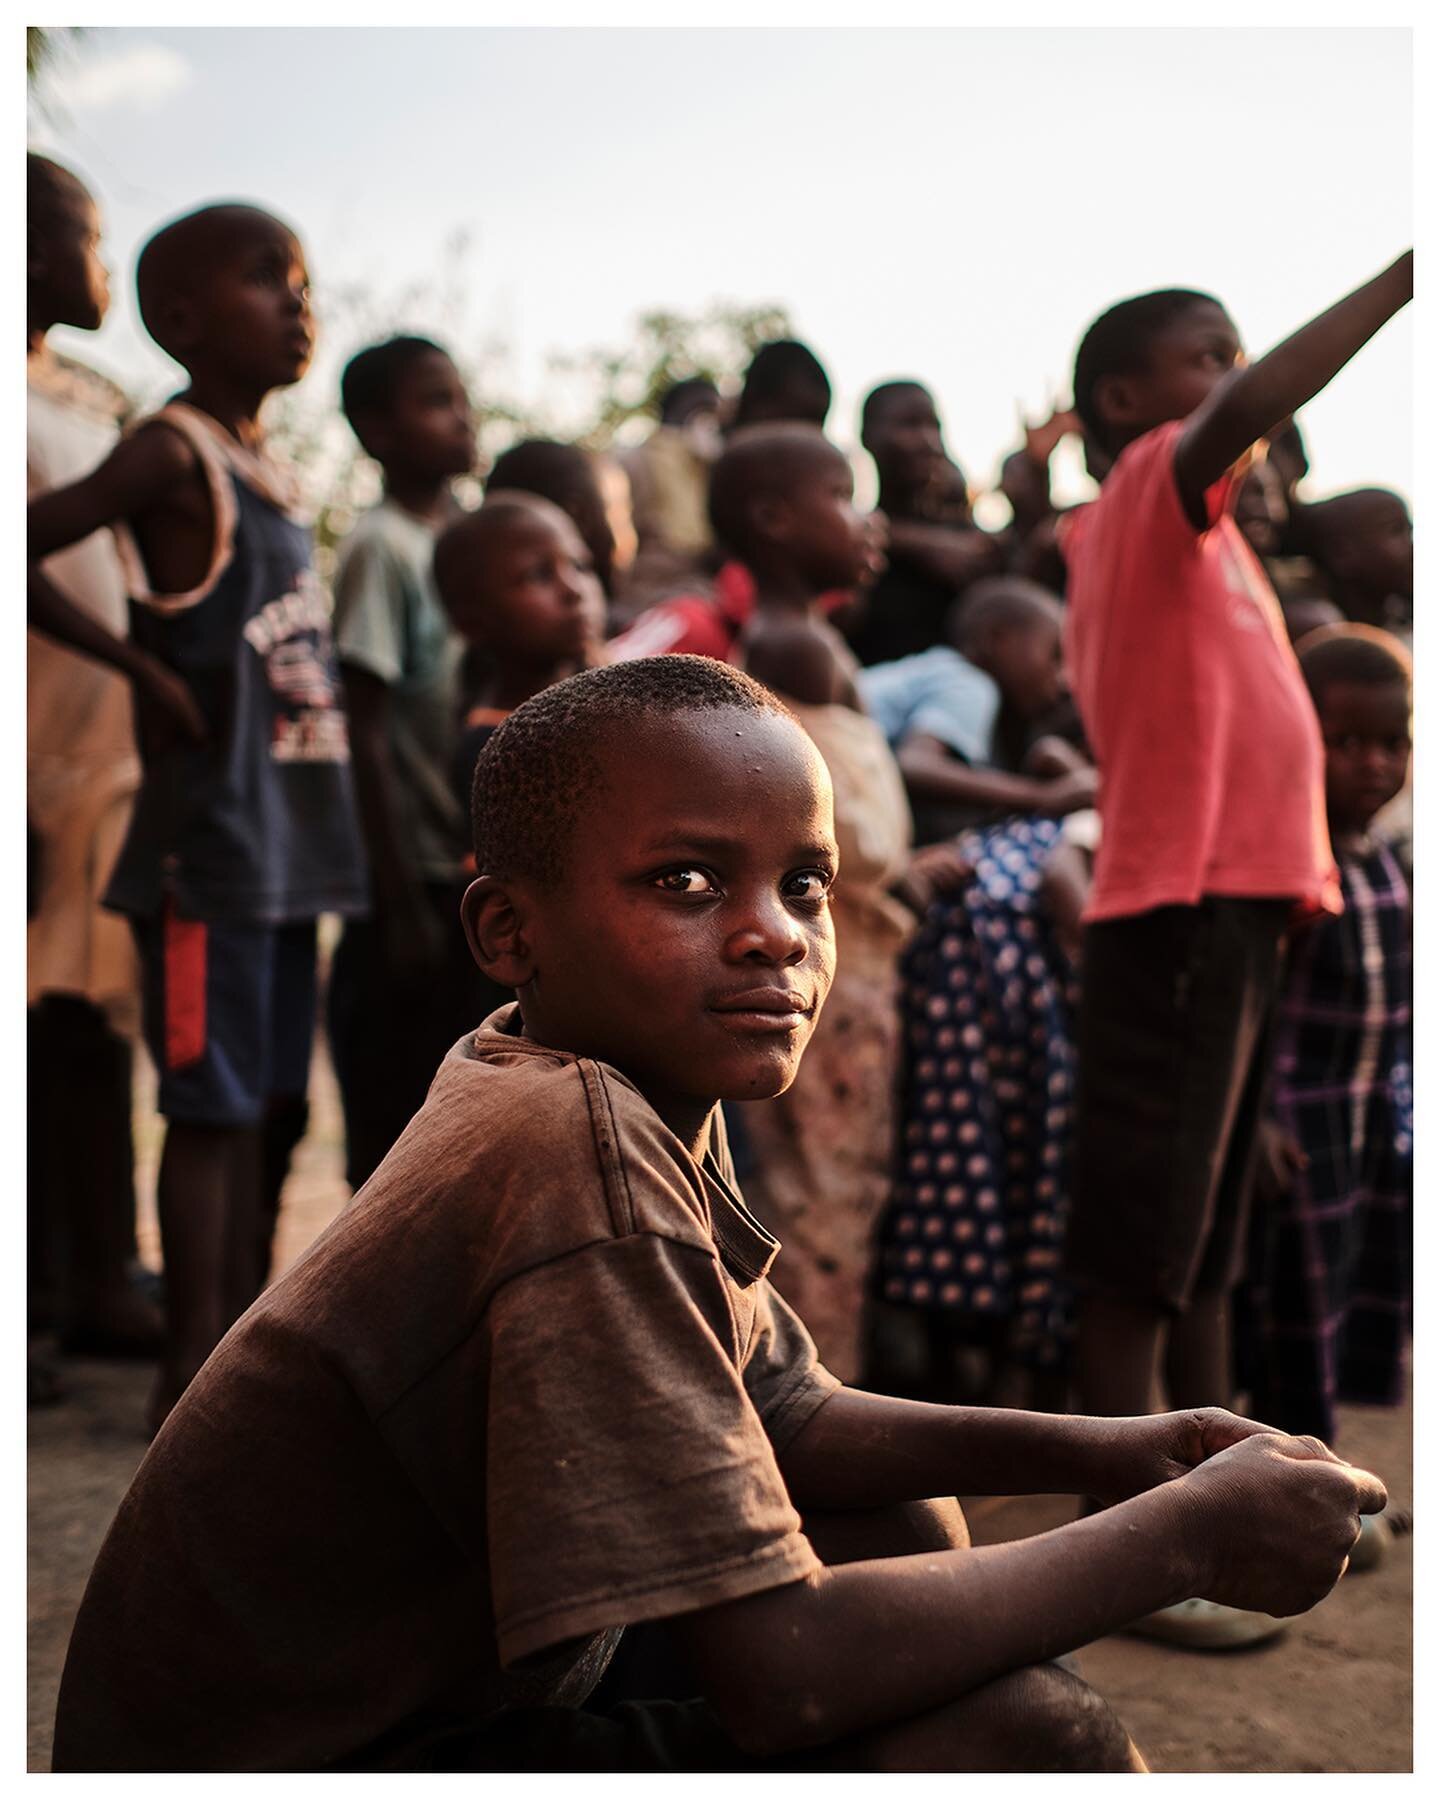 finally I am sharing these memories properly. very proud of capturing these special moments down in Malawi last year together with @dustynalt on our journey for @space.africa 

#malawi #lilongwe #africa #fujifilmde #myfujifilmlegacy #fujifilm #fujifi